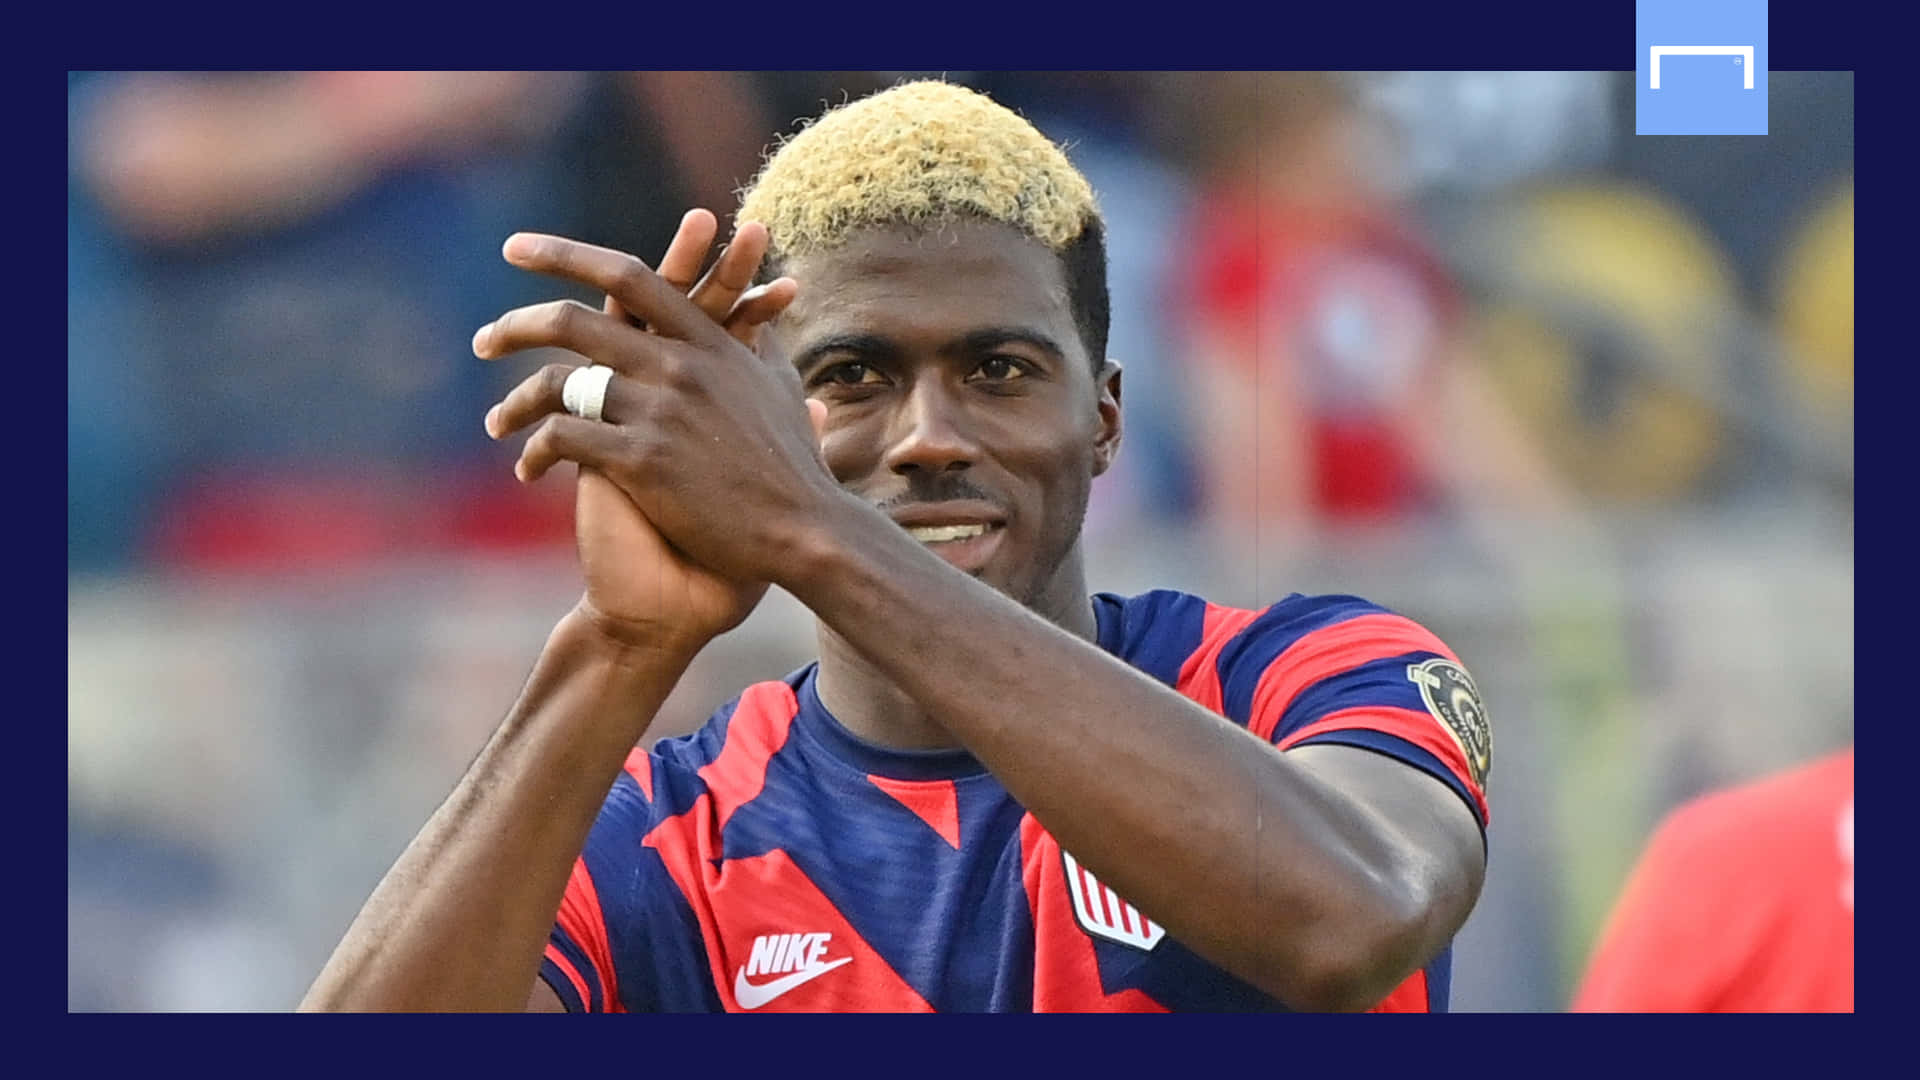 Gyasizardes Applåderar På Concacaf Gold Cup - As A Native Swedish Speaker, I Would Translate This Sentence To Mean That Gyasi Zardes Is Clapping At The Concacaf Gold Cup. However, It Is Unclear How This Sentence Relates To Computer Or Mobile Wallpaper. Please Provide Additional Context. Wallpaper